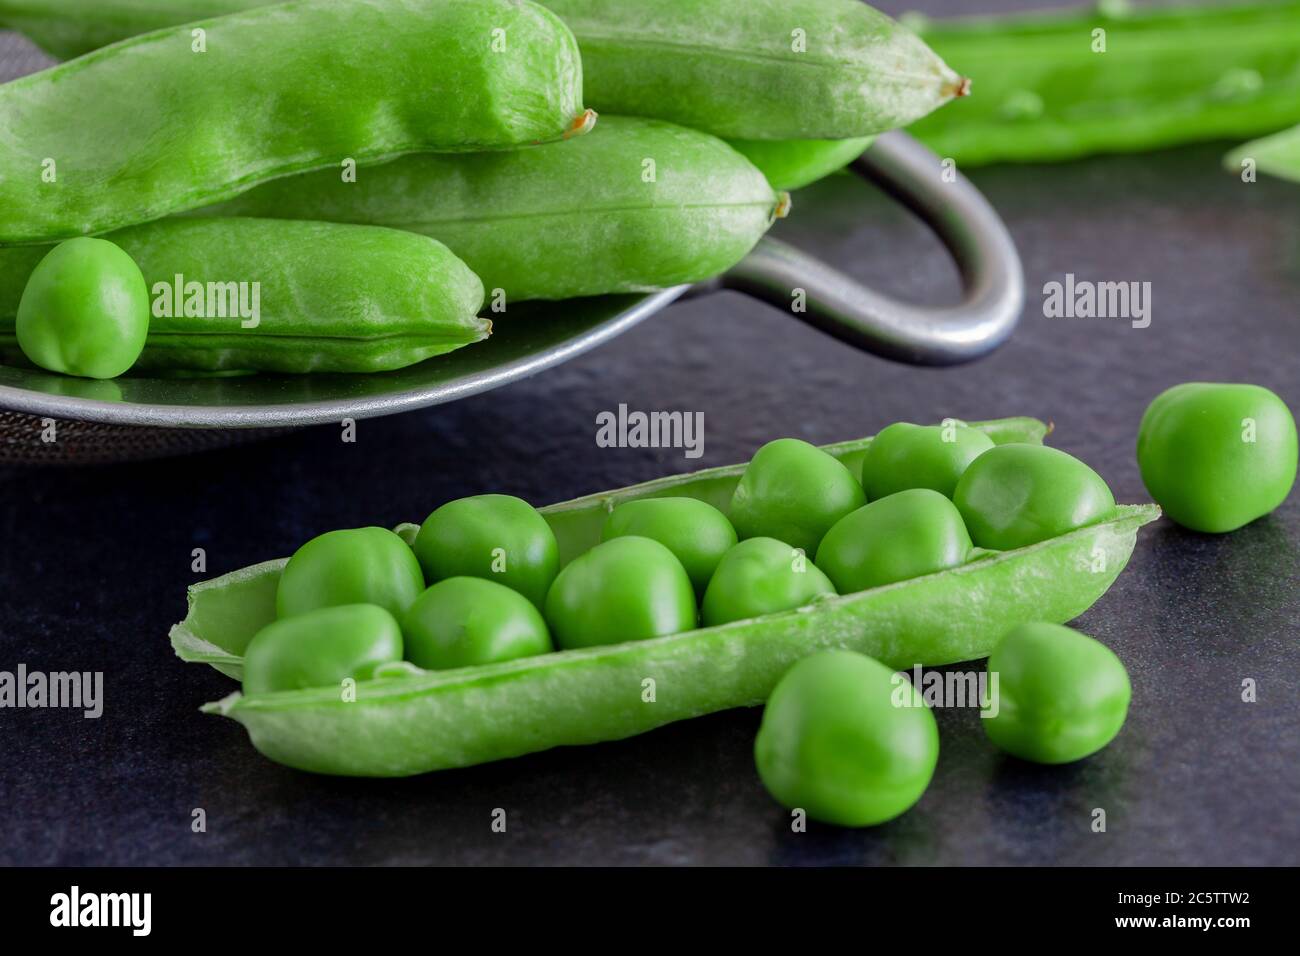 open pea pods on a dark table with a sieve in the background Stock Photo